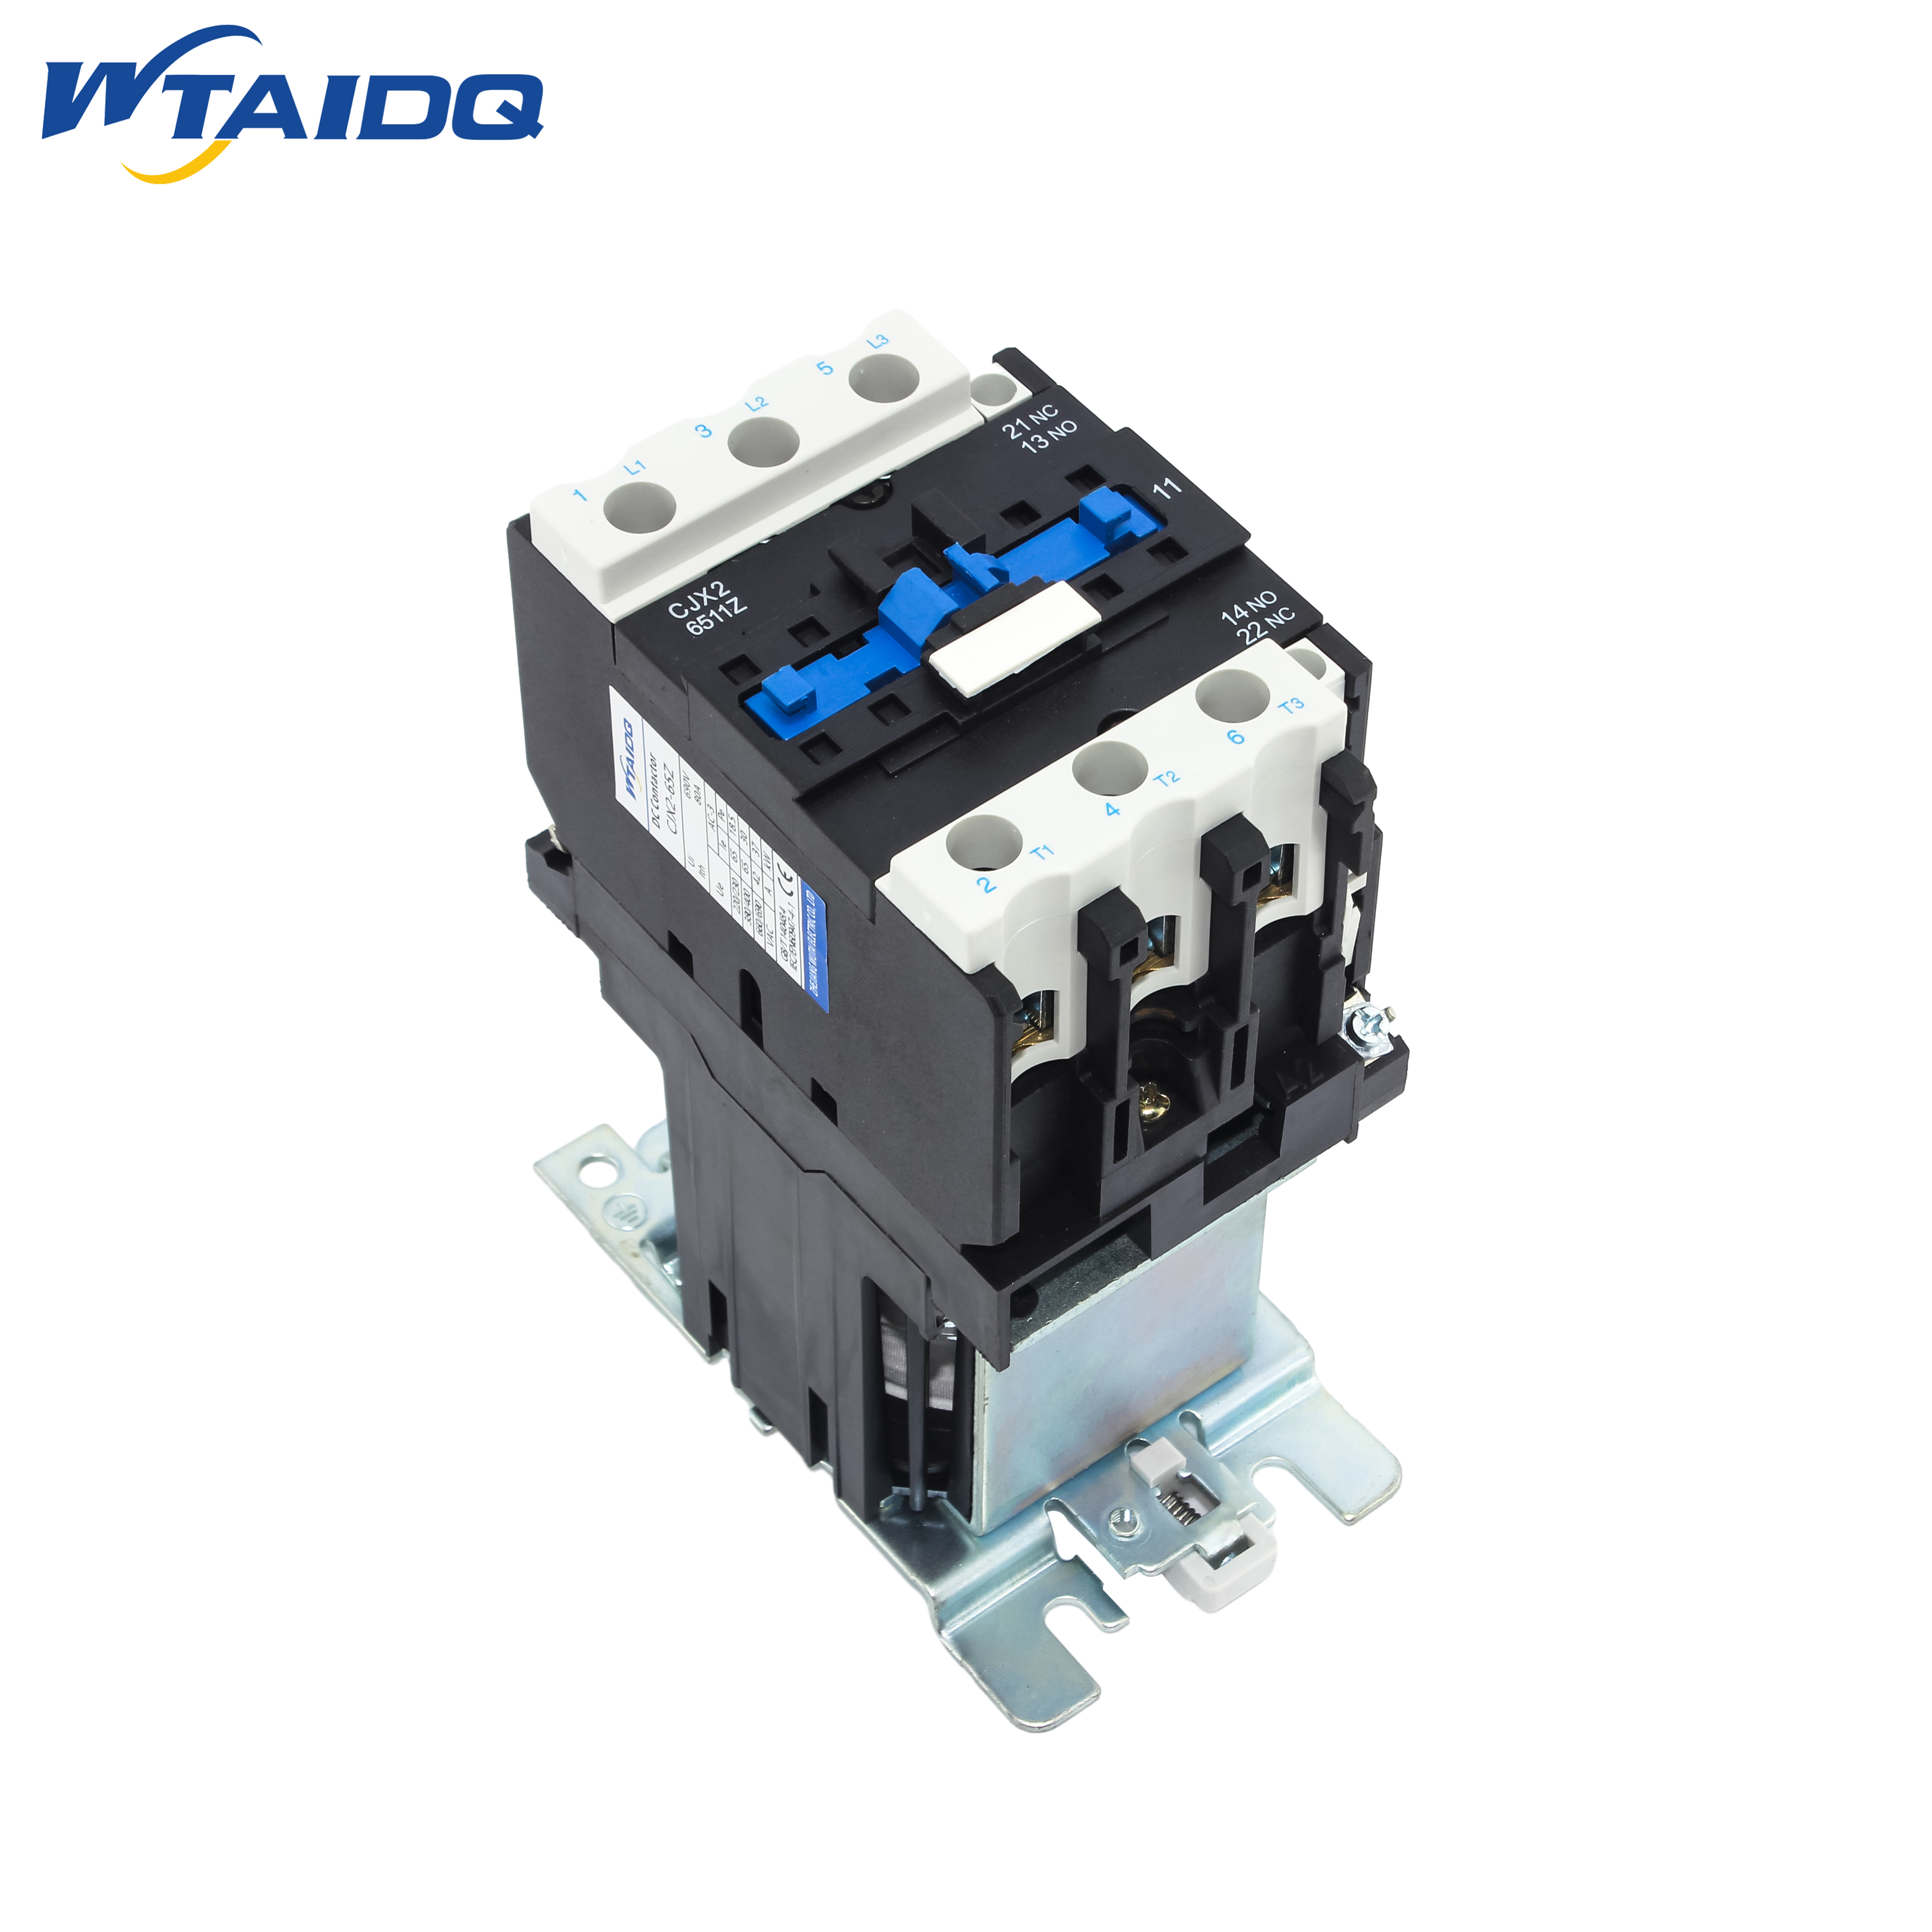 Understand the main uses of DC contactor CJx2